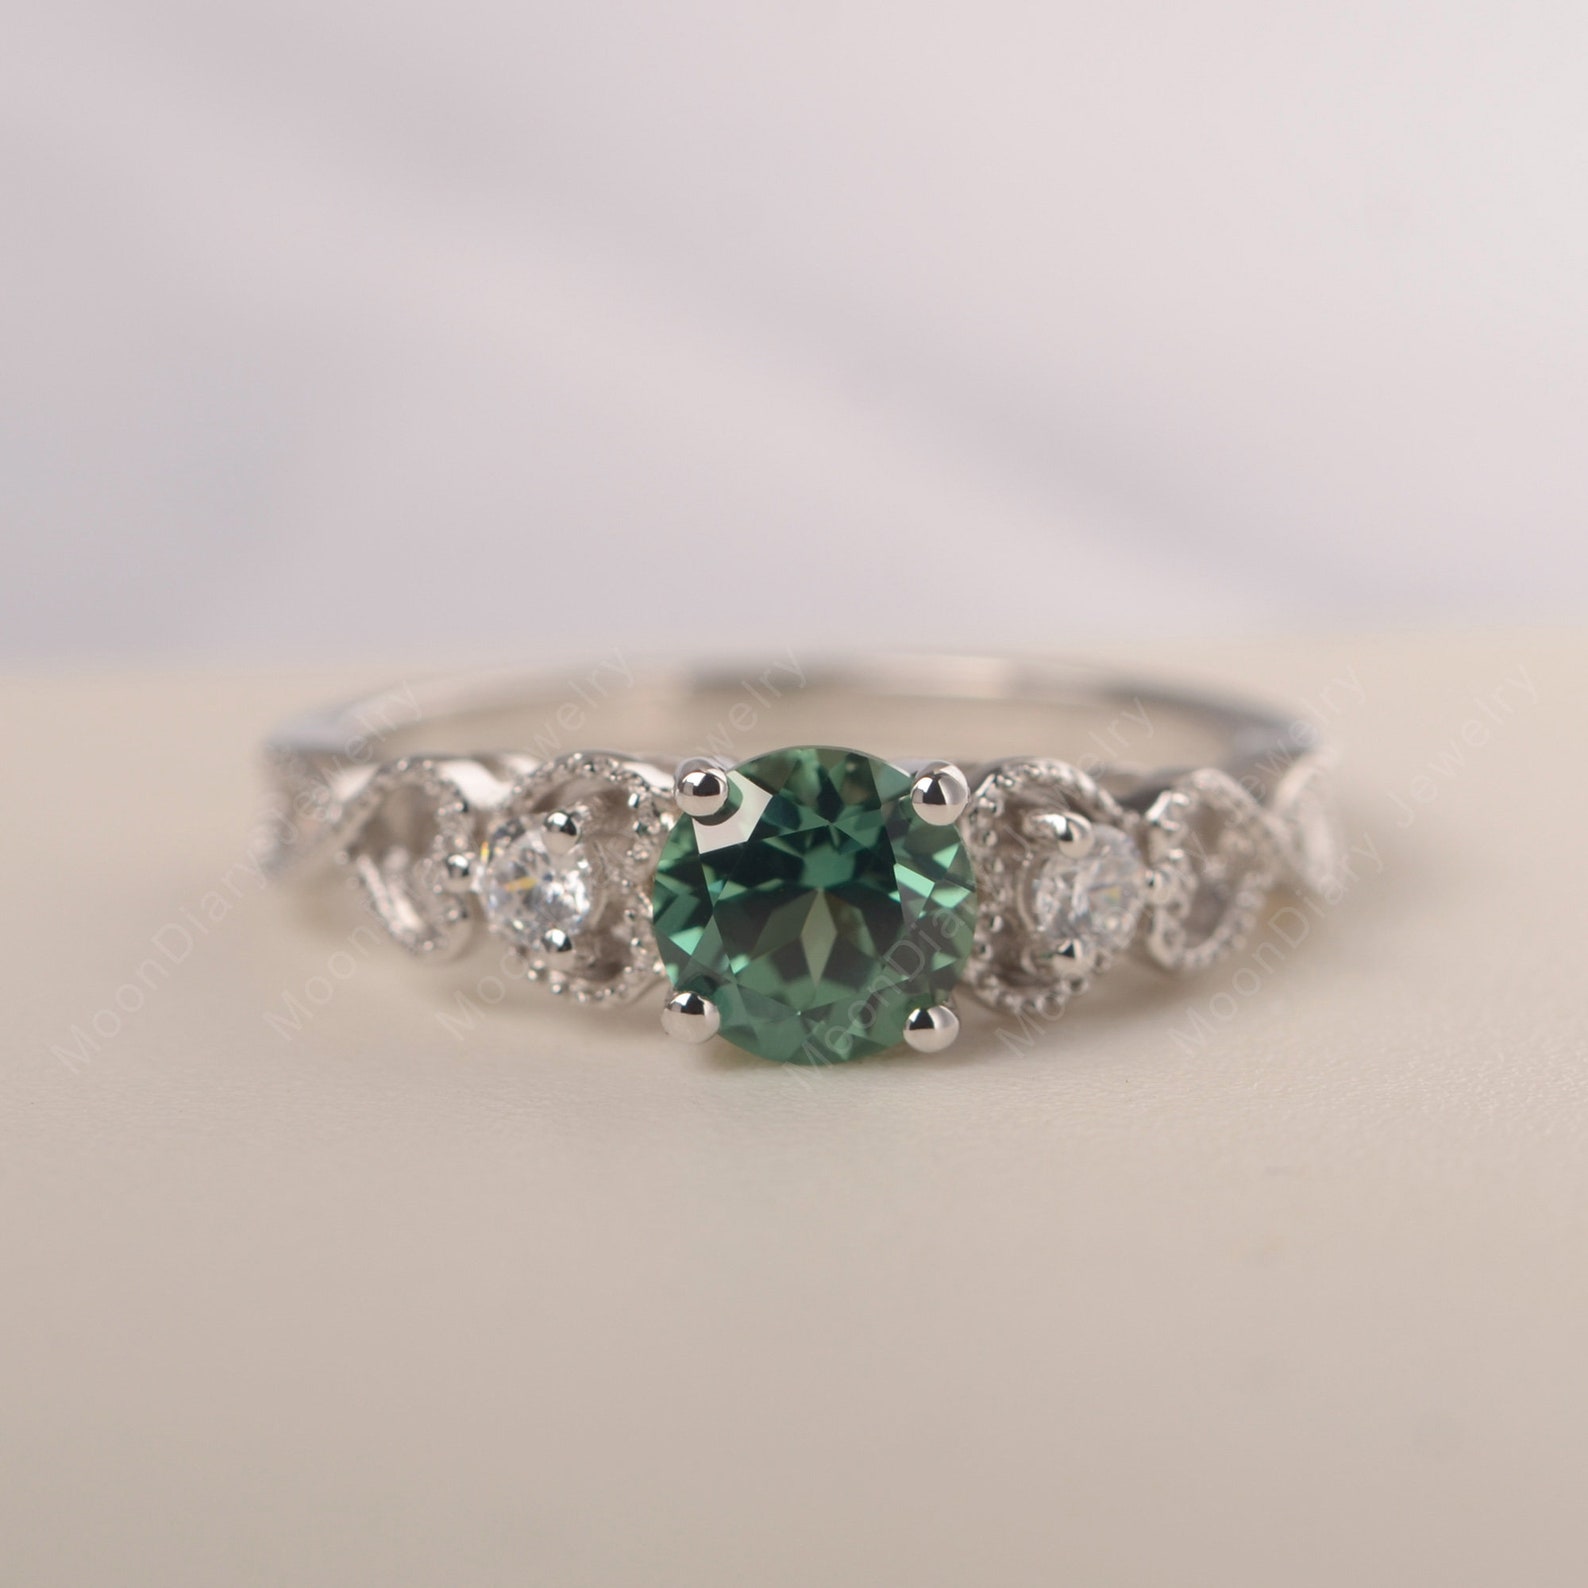 Green Sapphire Ring Sterling Silver Round Cut Teal Sapphire - Etsy UK